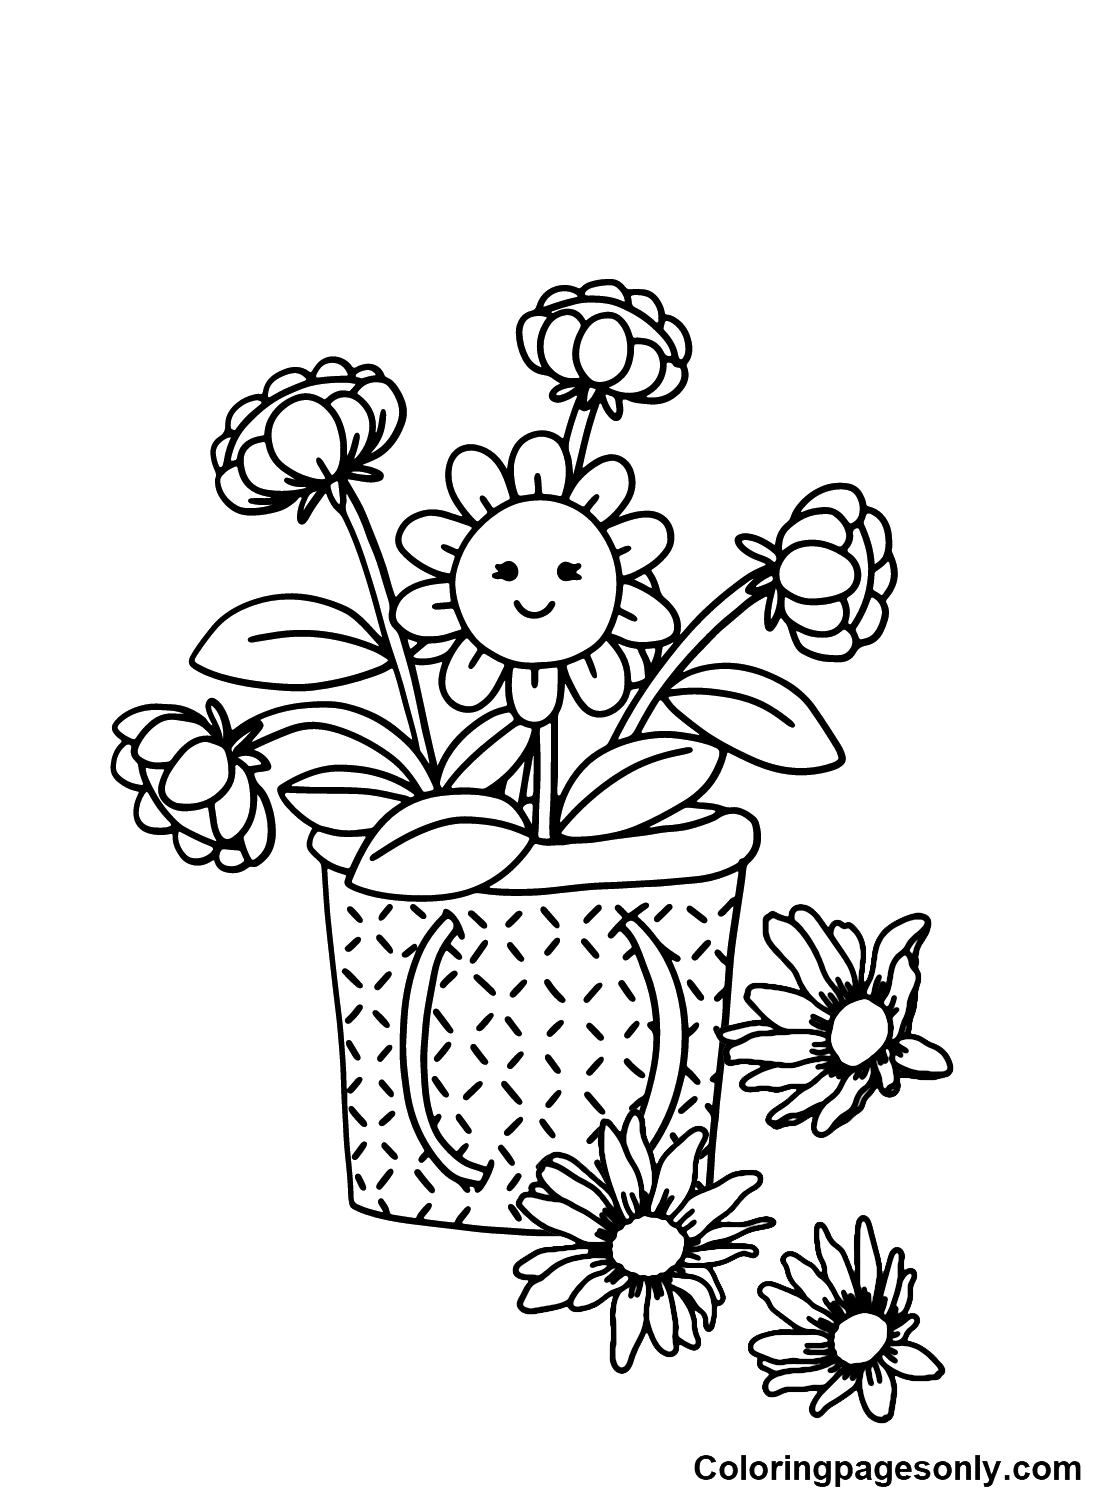 First Day of Spring for Children Coloring Pages